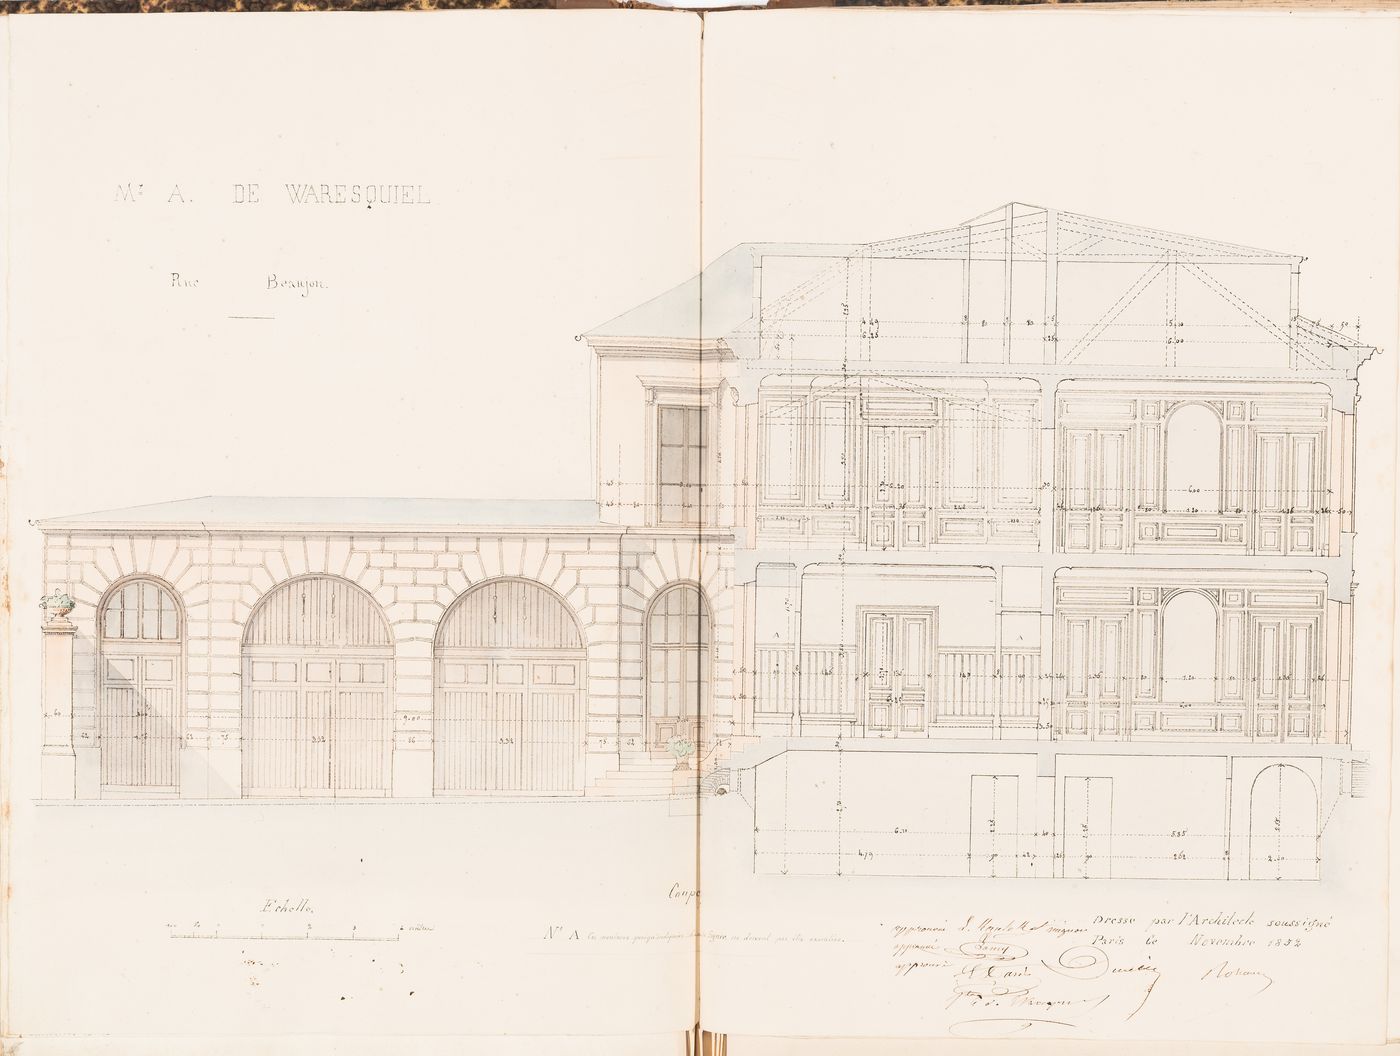 Contract drawing for a house for Monsieur A. Waresquiel, rue Beaujon, Paris: Longitudinal section through the courtyard